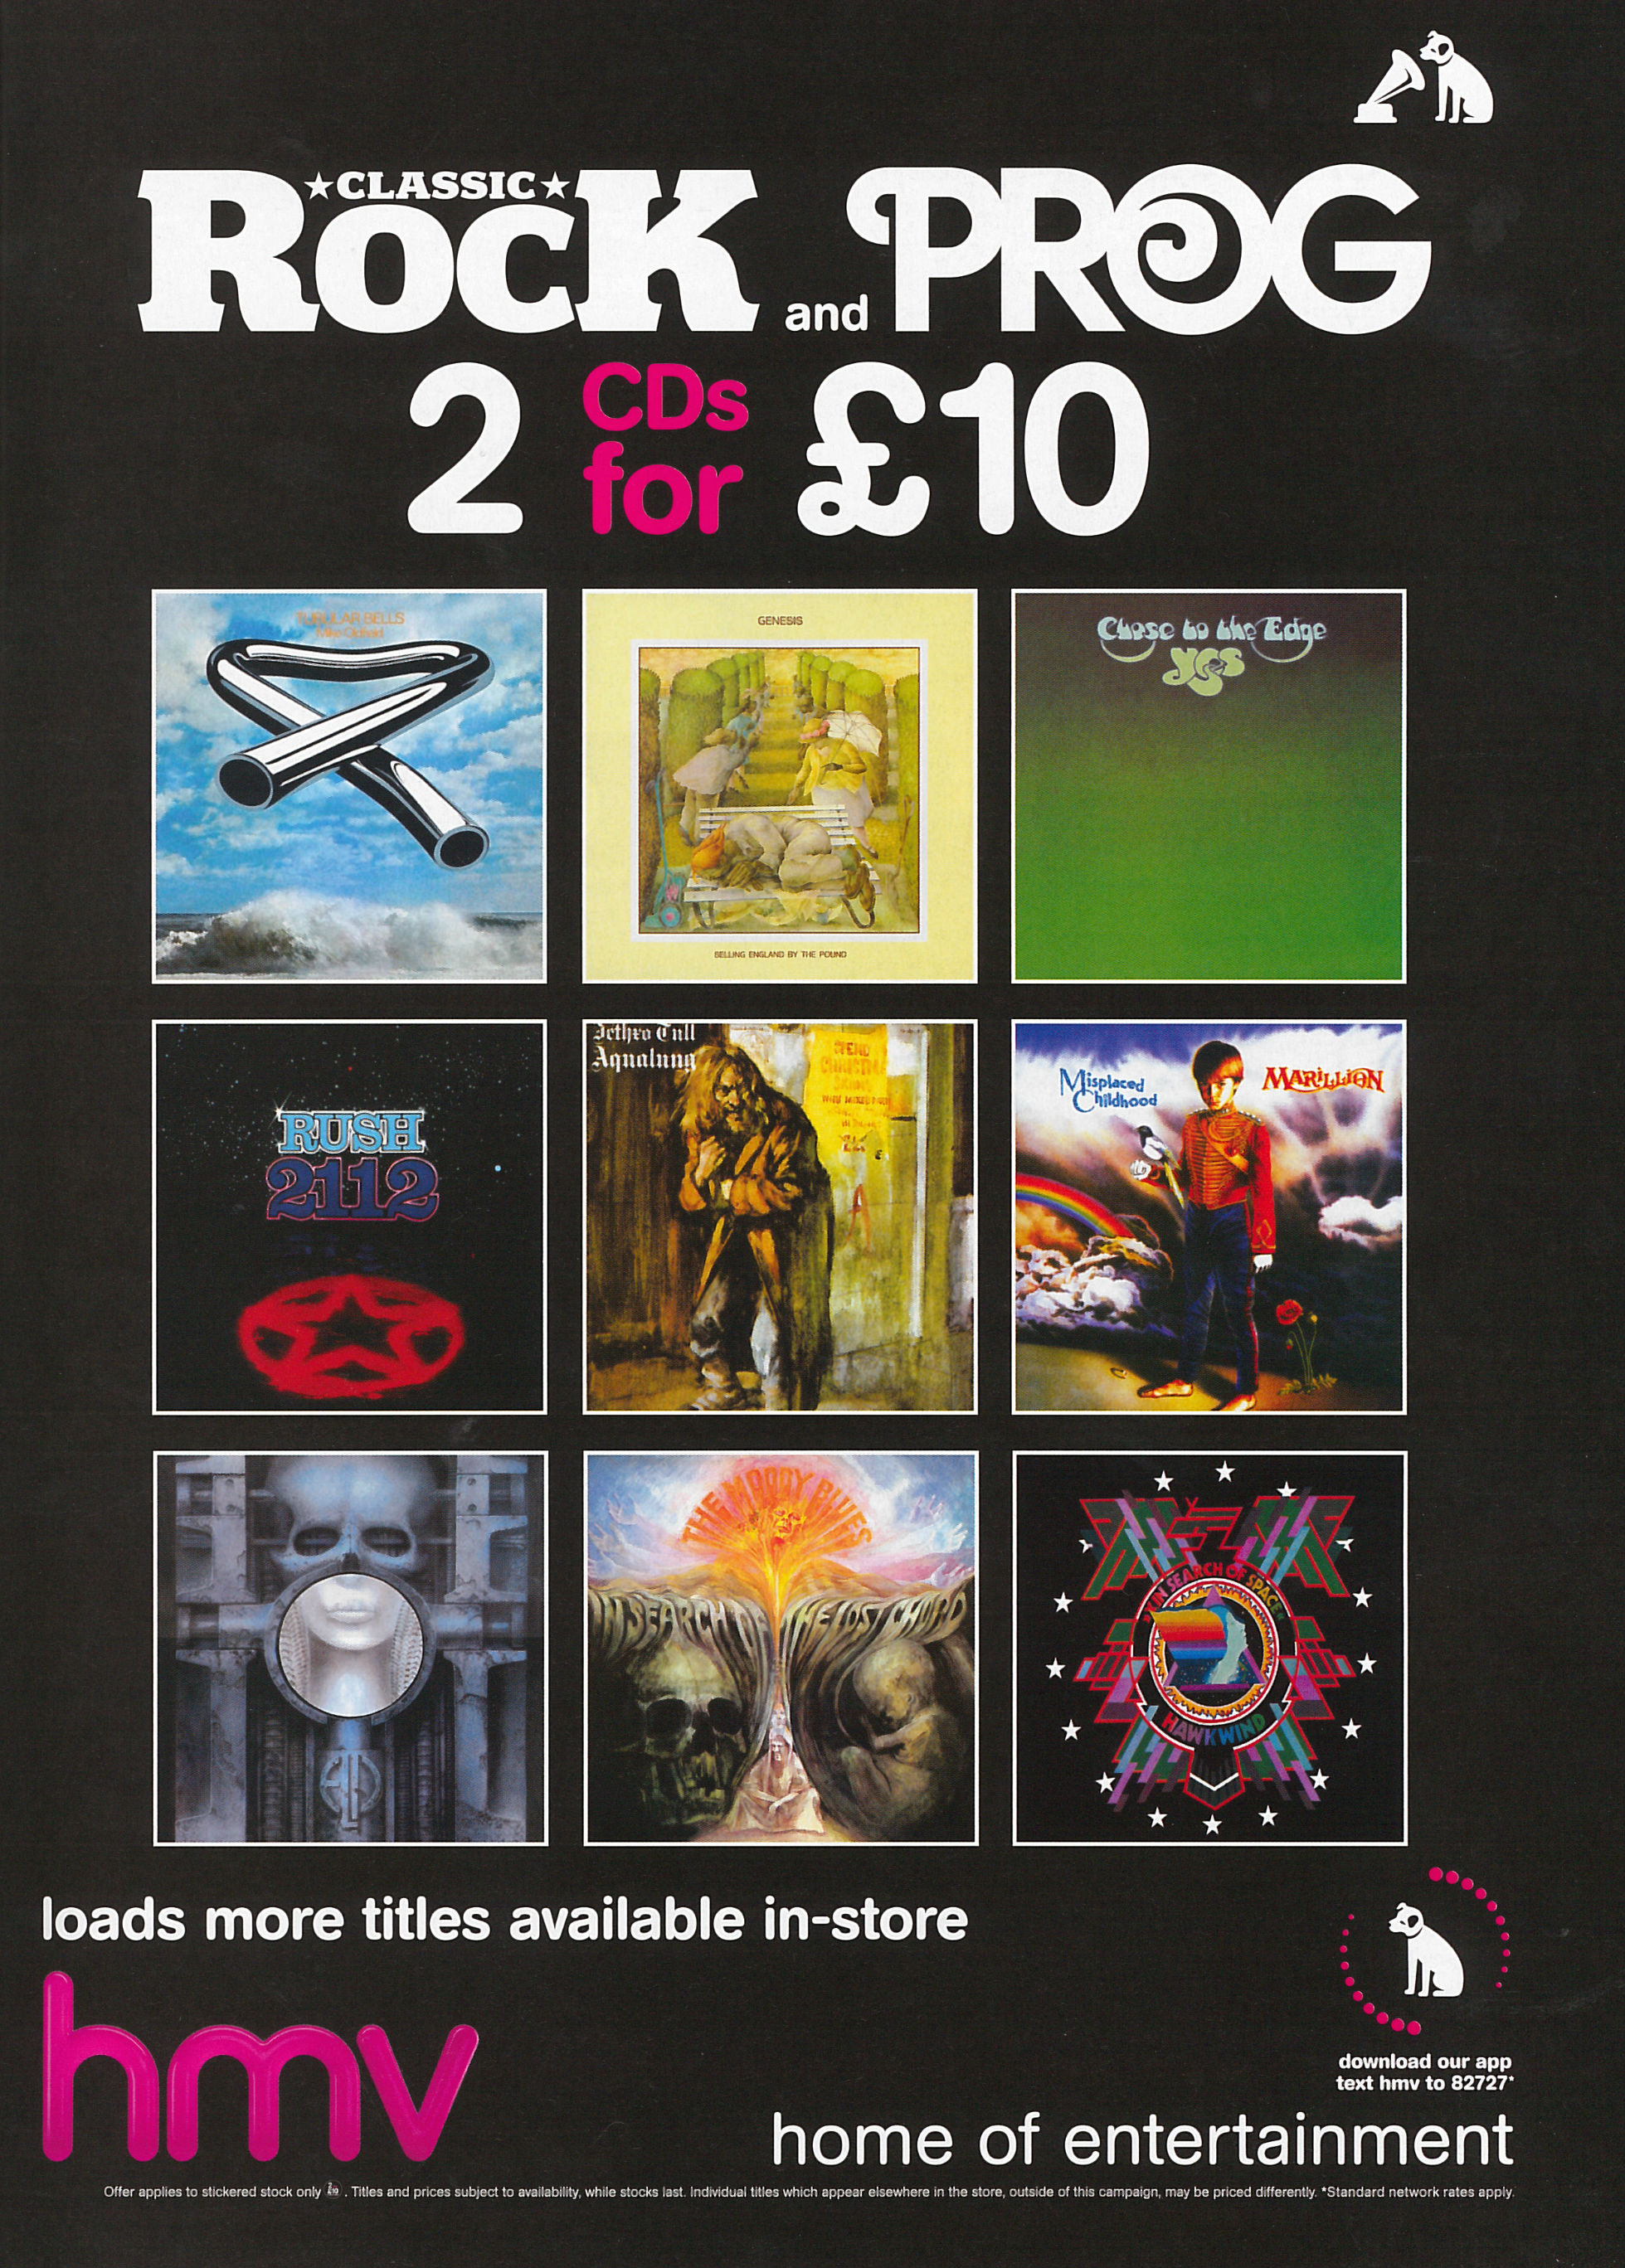 the-100-greatest-prog-albums-of-all-time-prog-magazine-august-2014